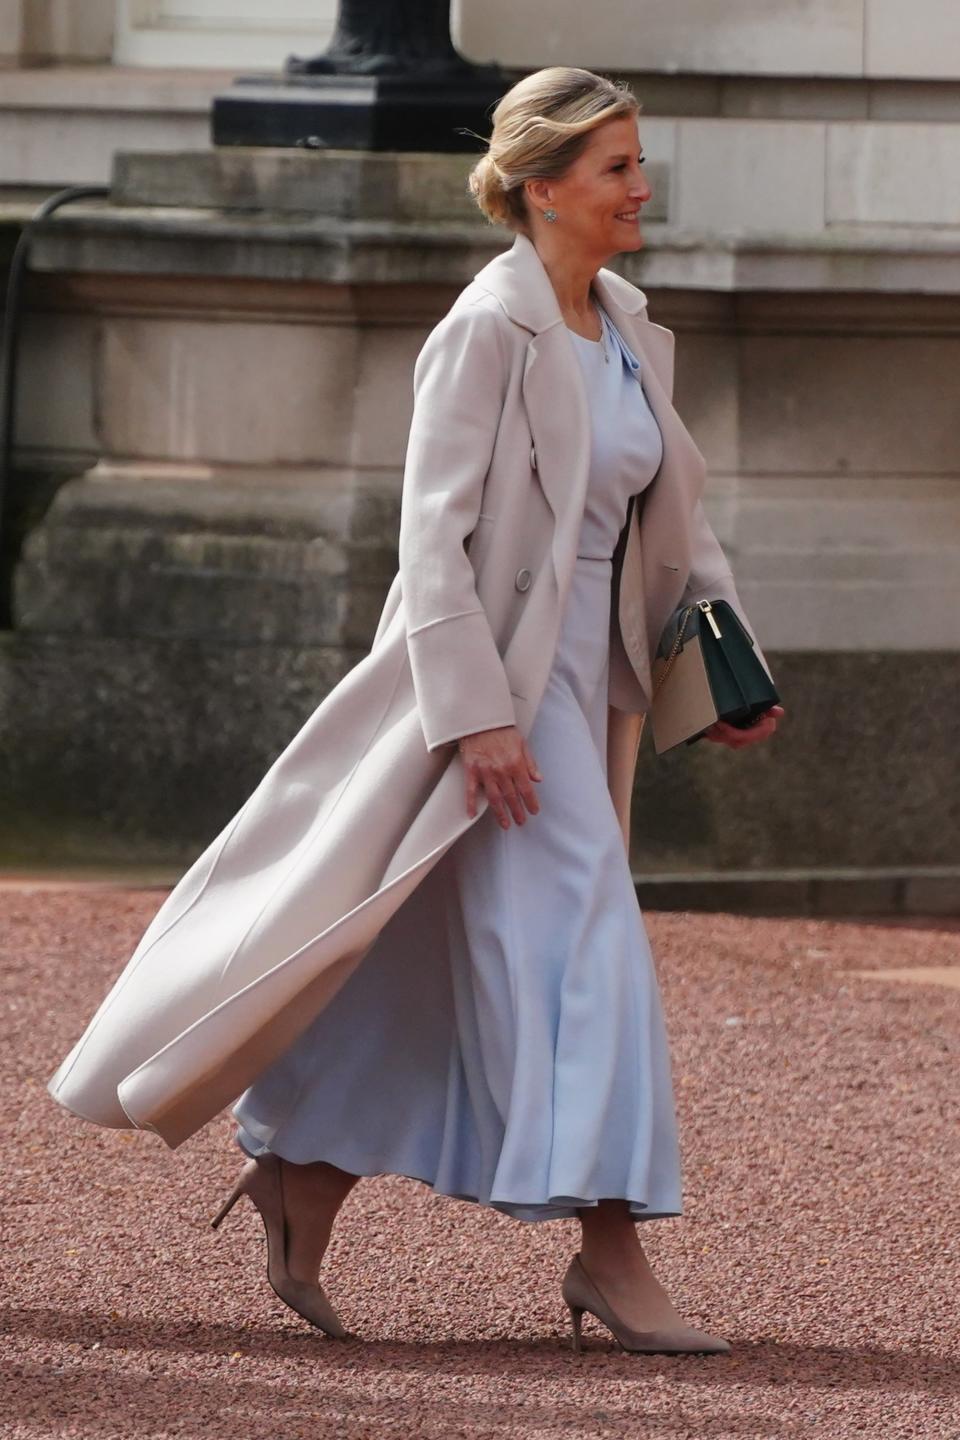 Sophie, Duchess of Edinburgh on behalf of King Charles III, attends the Changing of the Guard at Buckingham Palace 